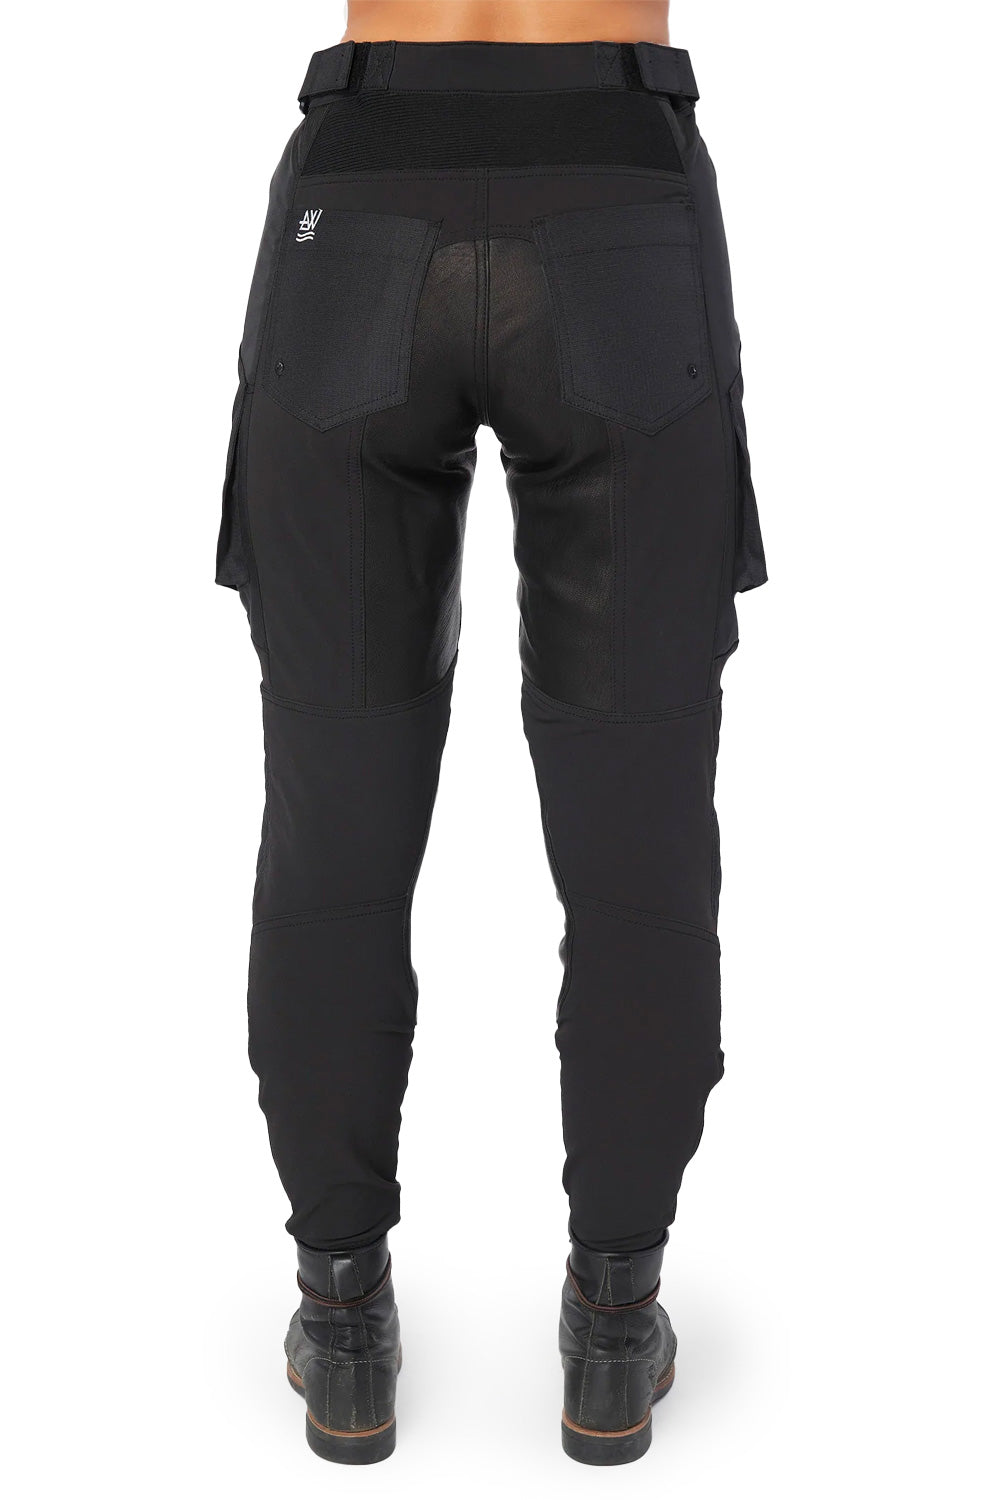 Velocity Off-Road Adventure Pants, ATWYLD